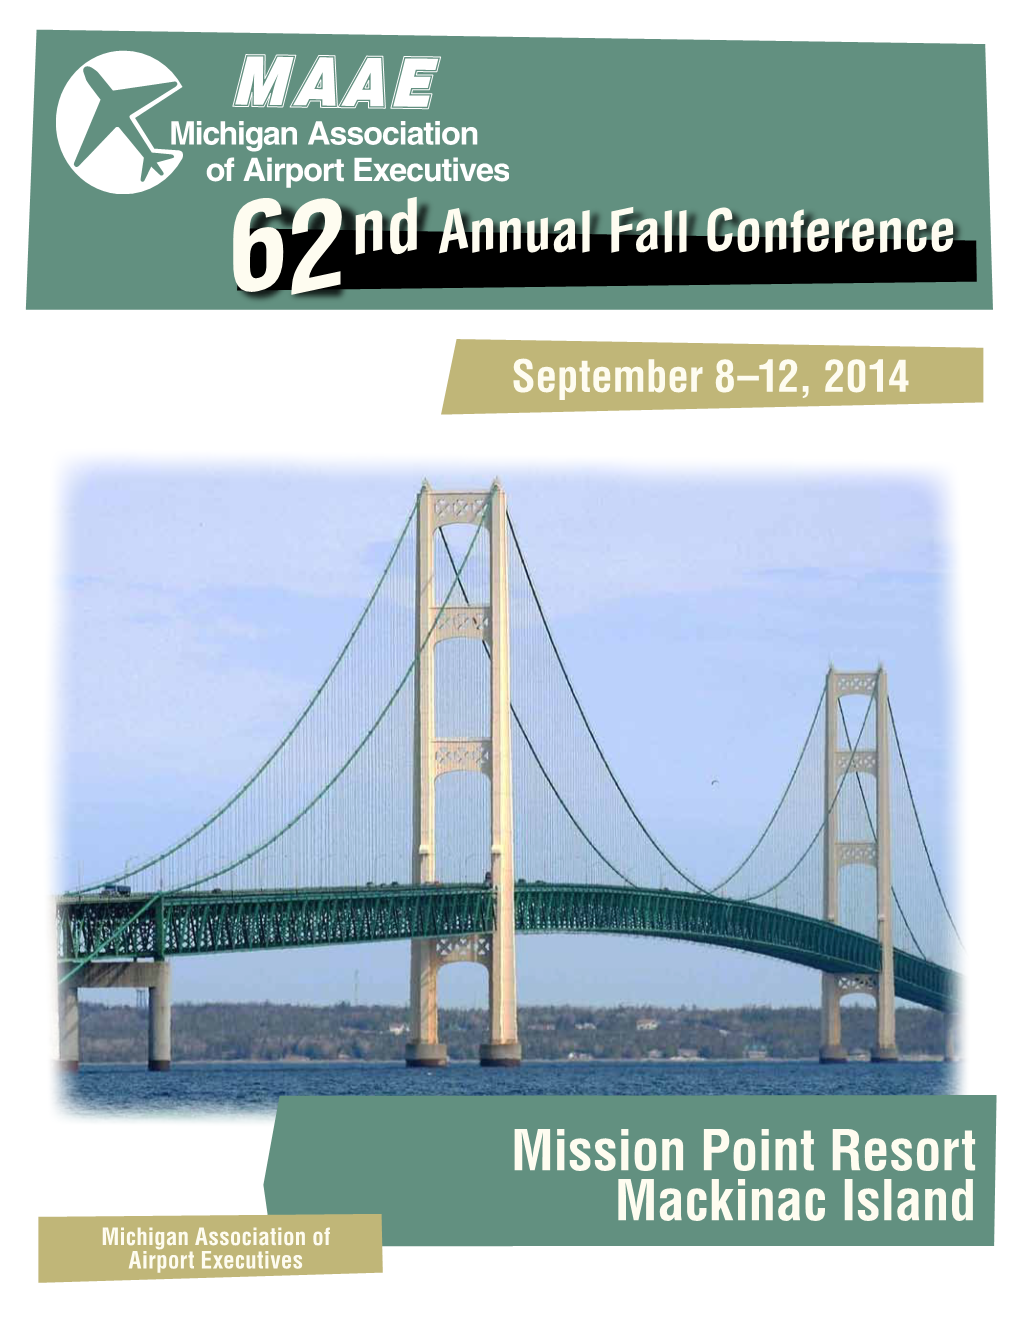 Annual Fall Conference Mission Point Resort Mackinac Island